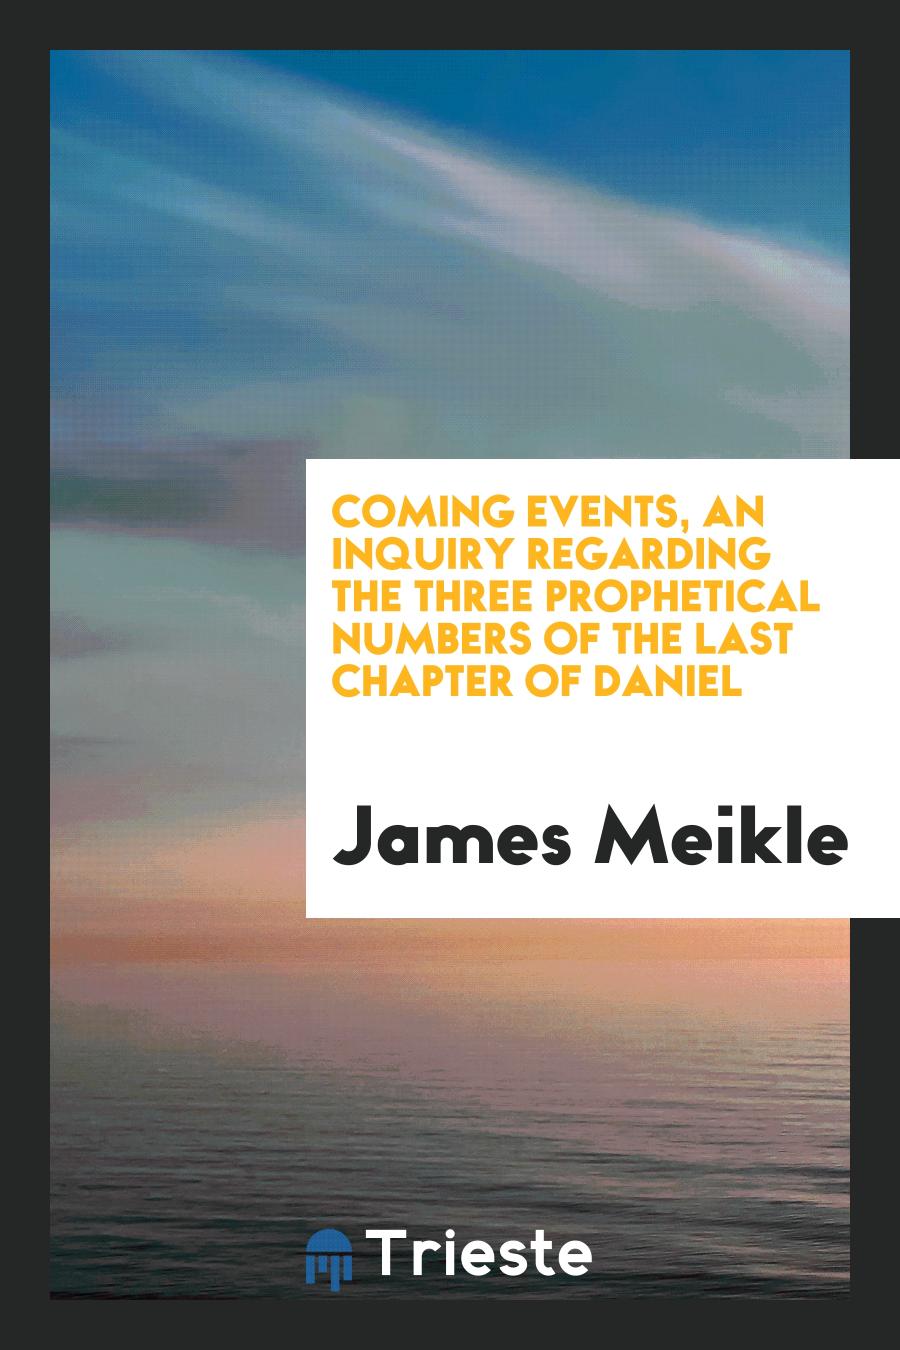 Coming Events, an Inquiry regarding the Three Prophetical Numbers of the Last Chapter of Daniel